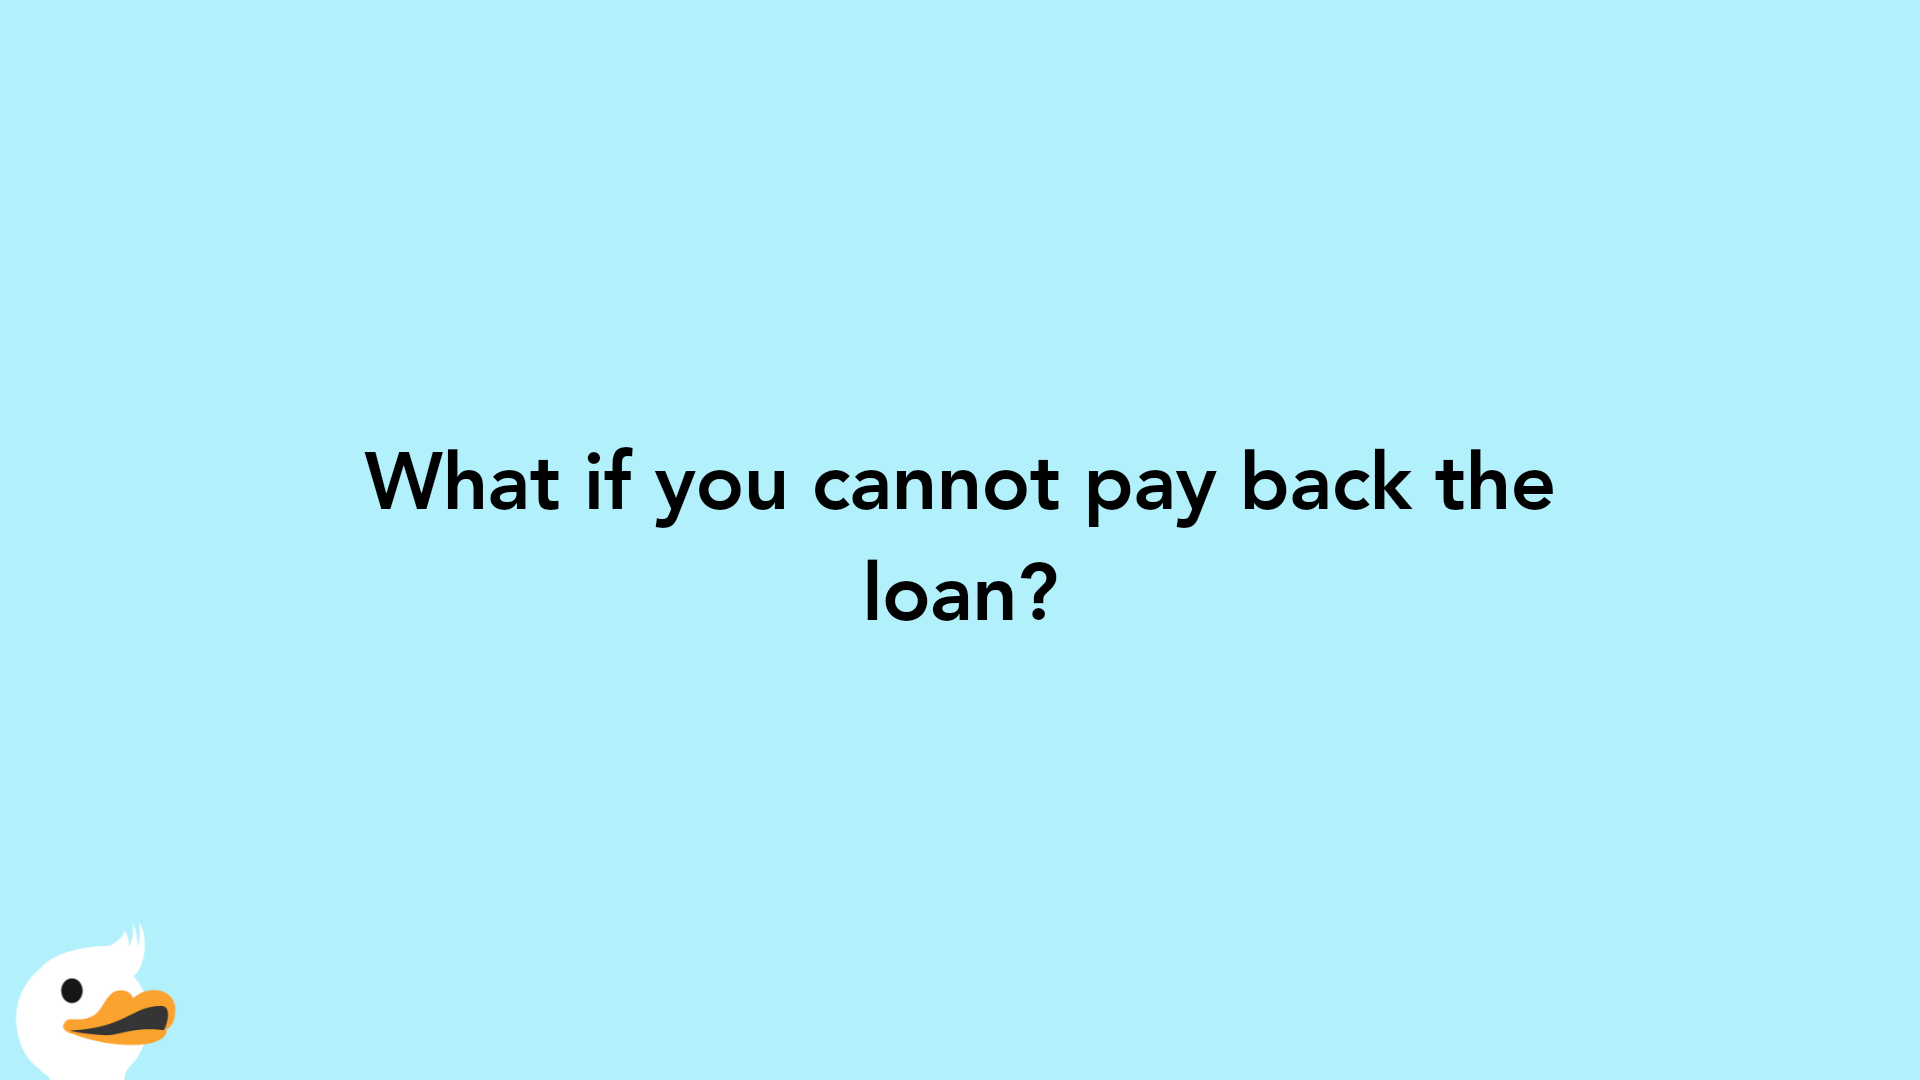 What if you cannot pay back the loan?